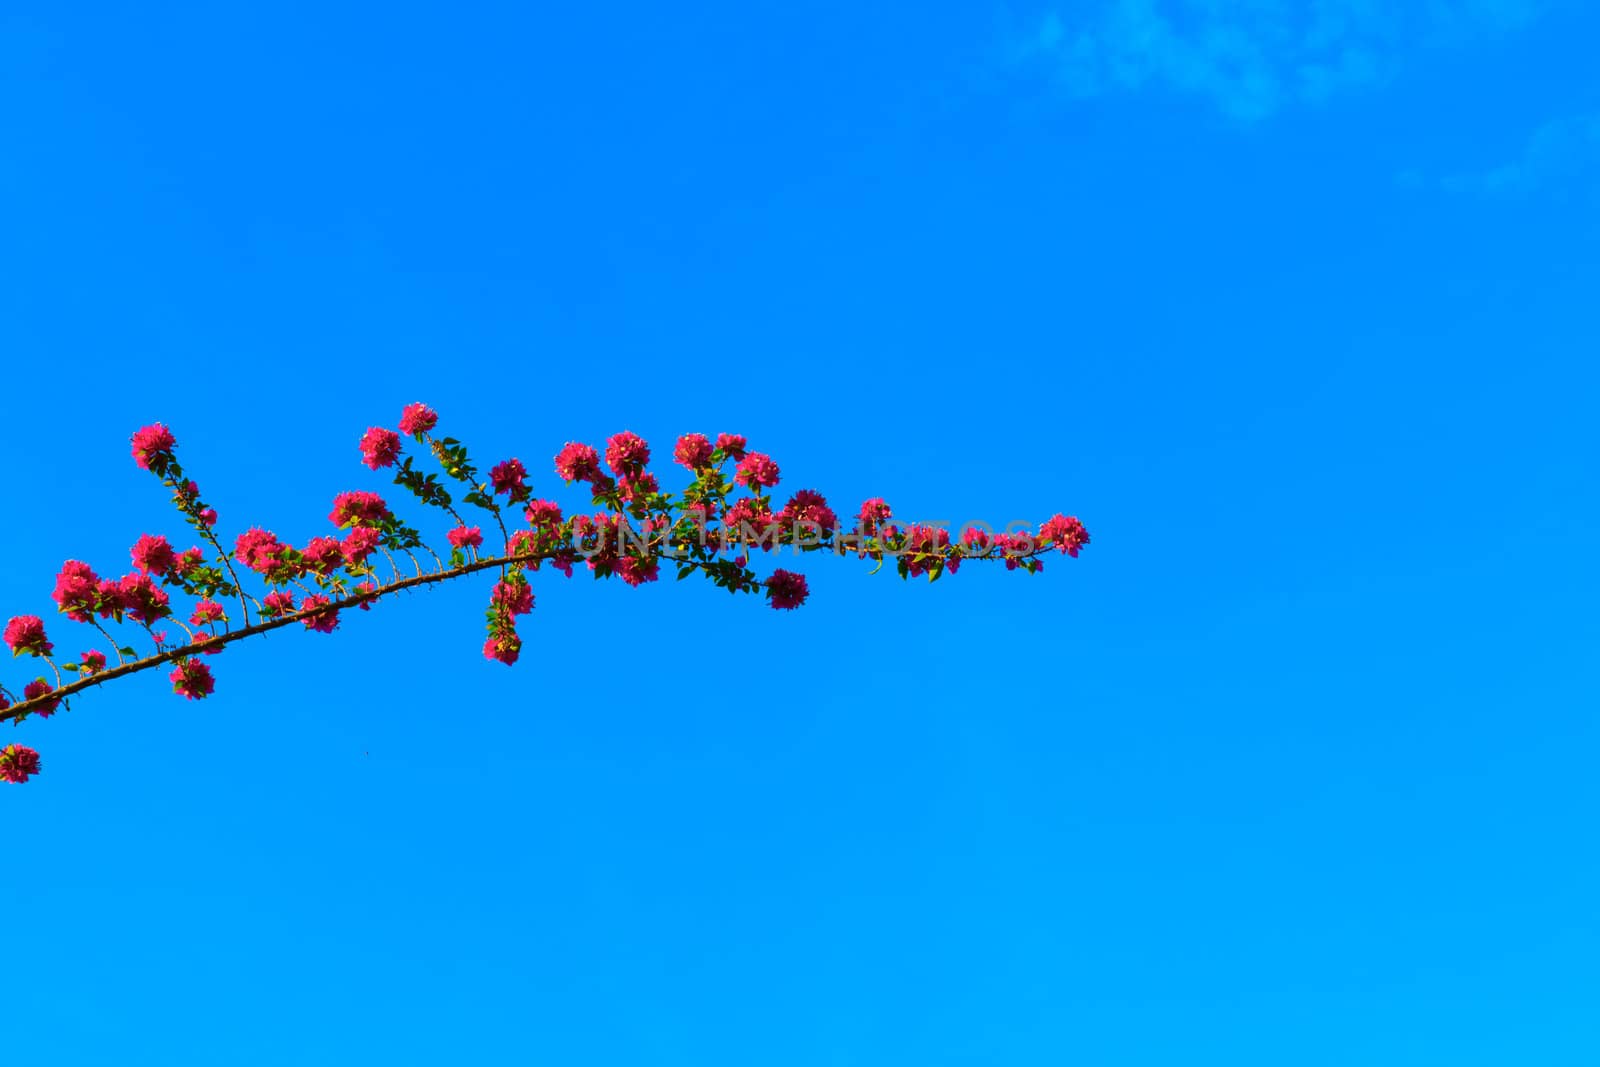 Flower and branches under the blue sky.